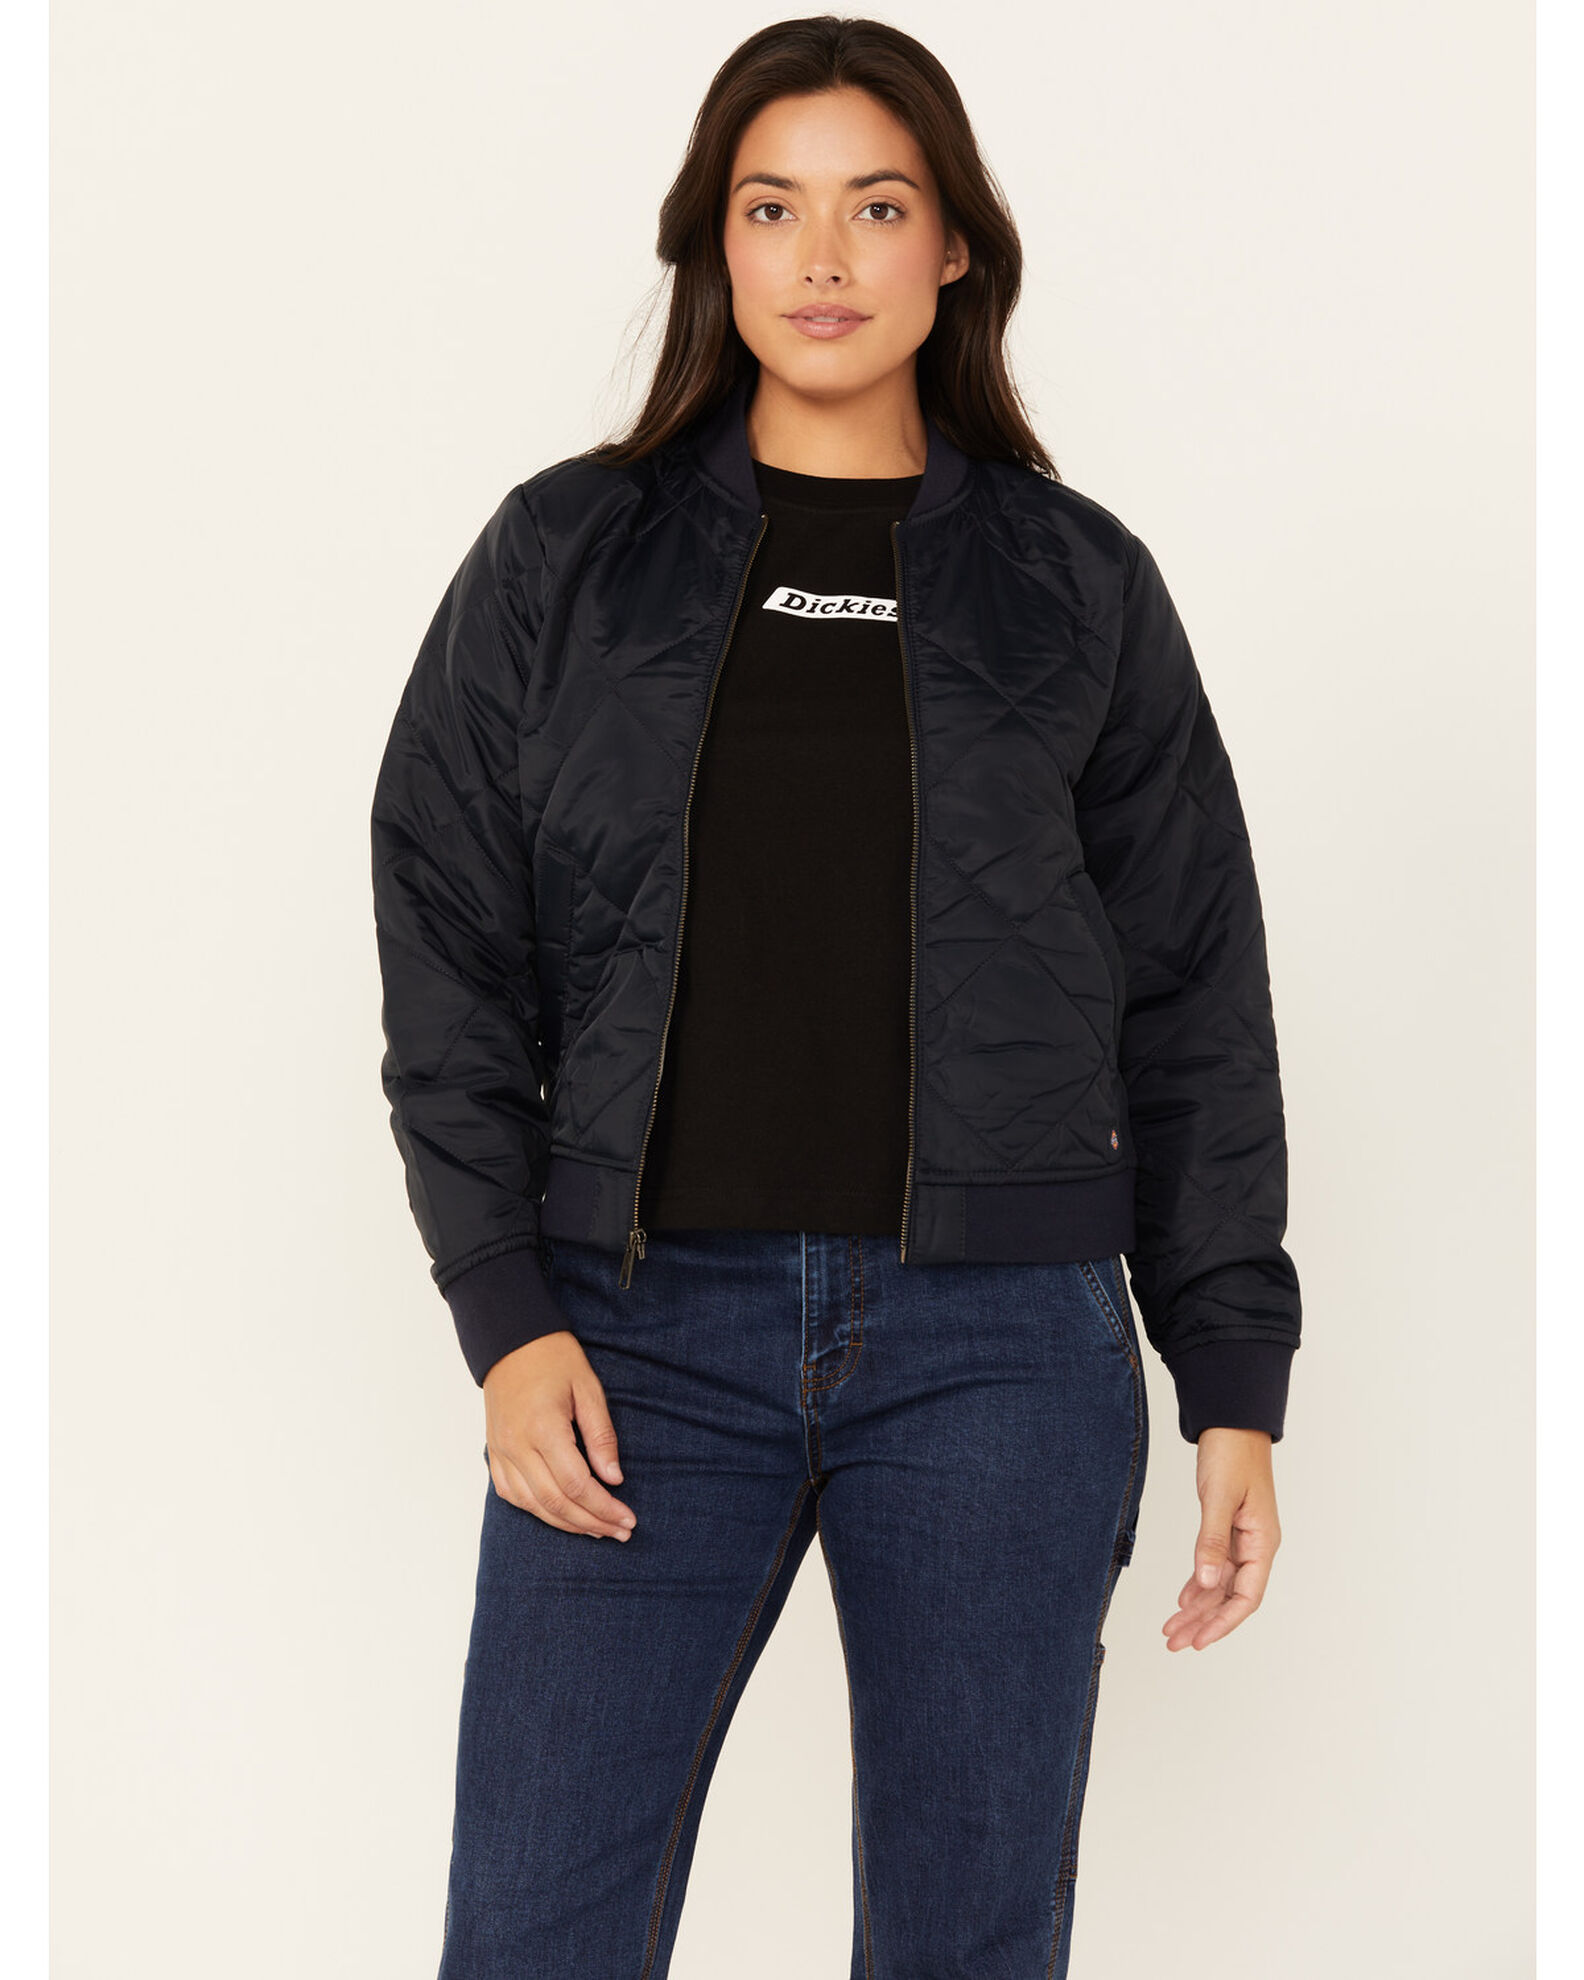 Dickies Women's Quilted Jacket